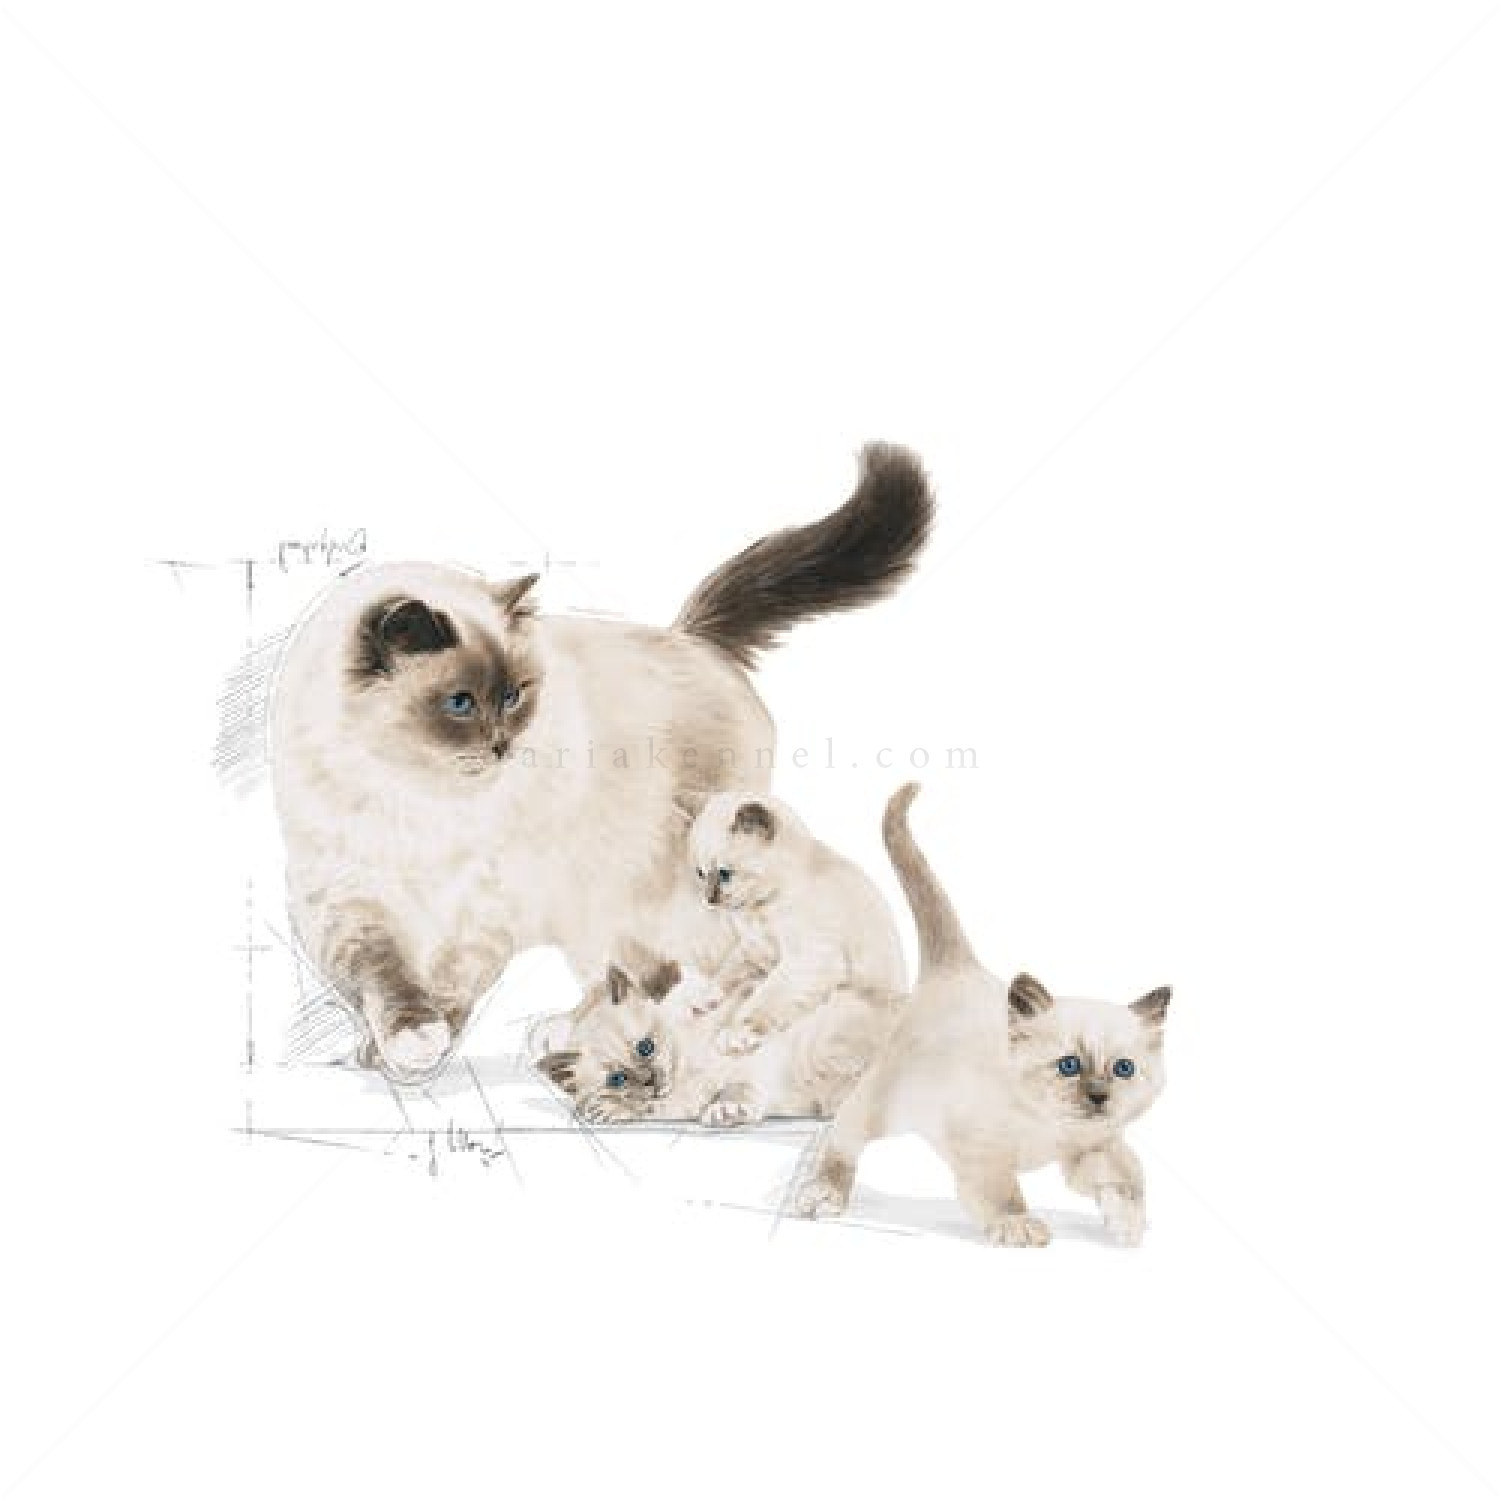 ROYAL CANIN 2 кг. Mother & Babycat